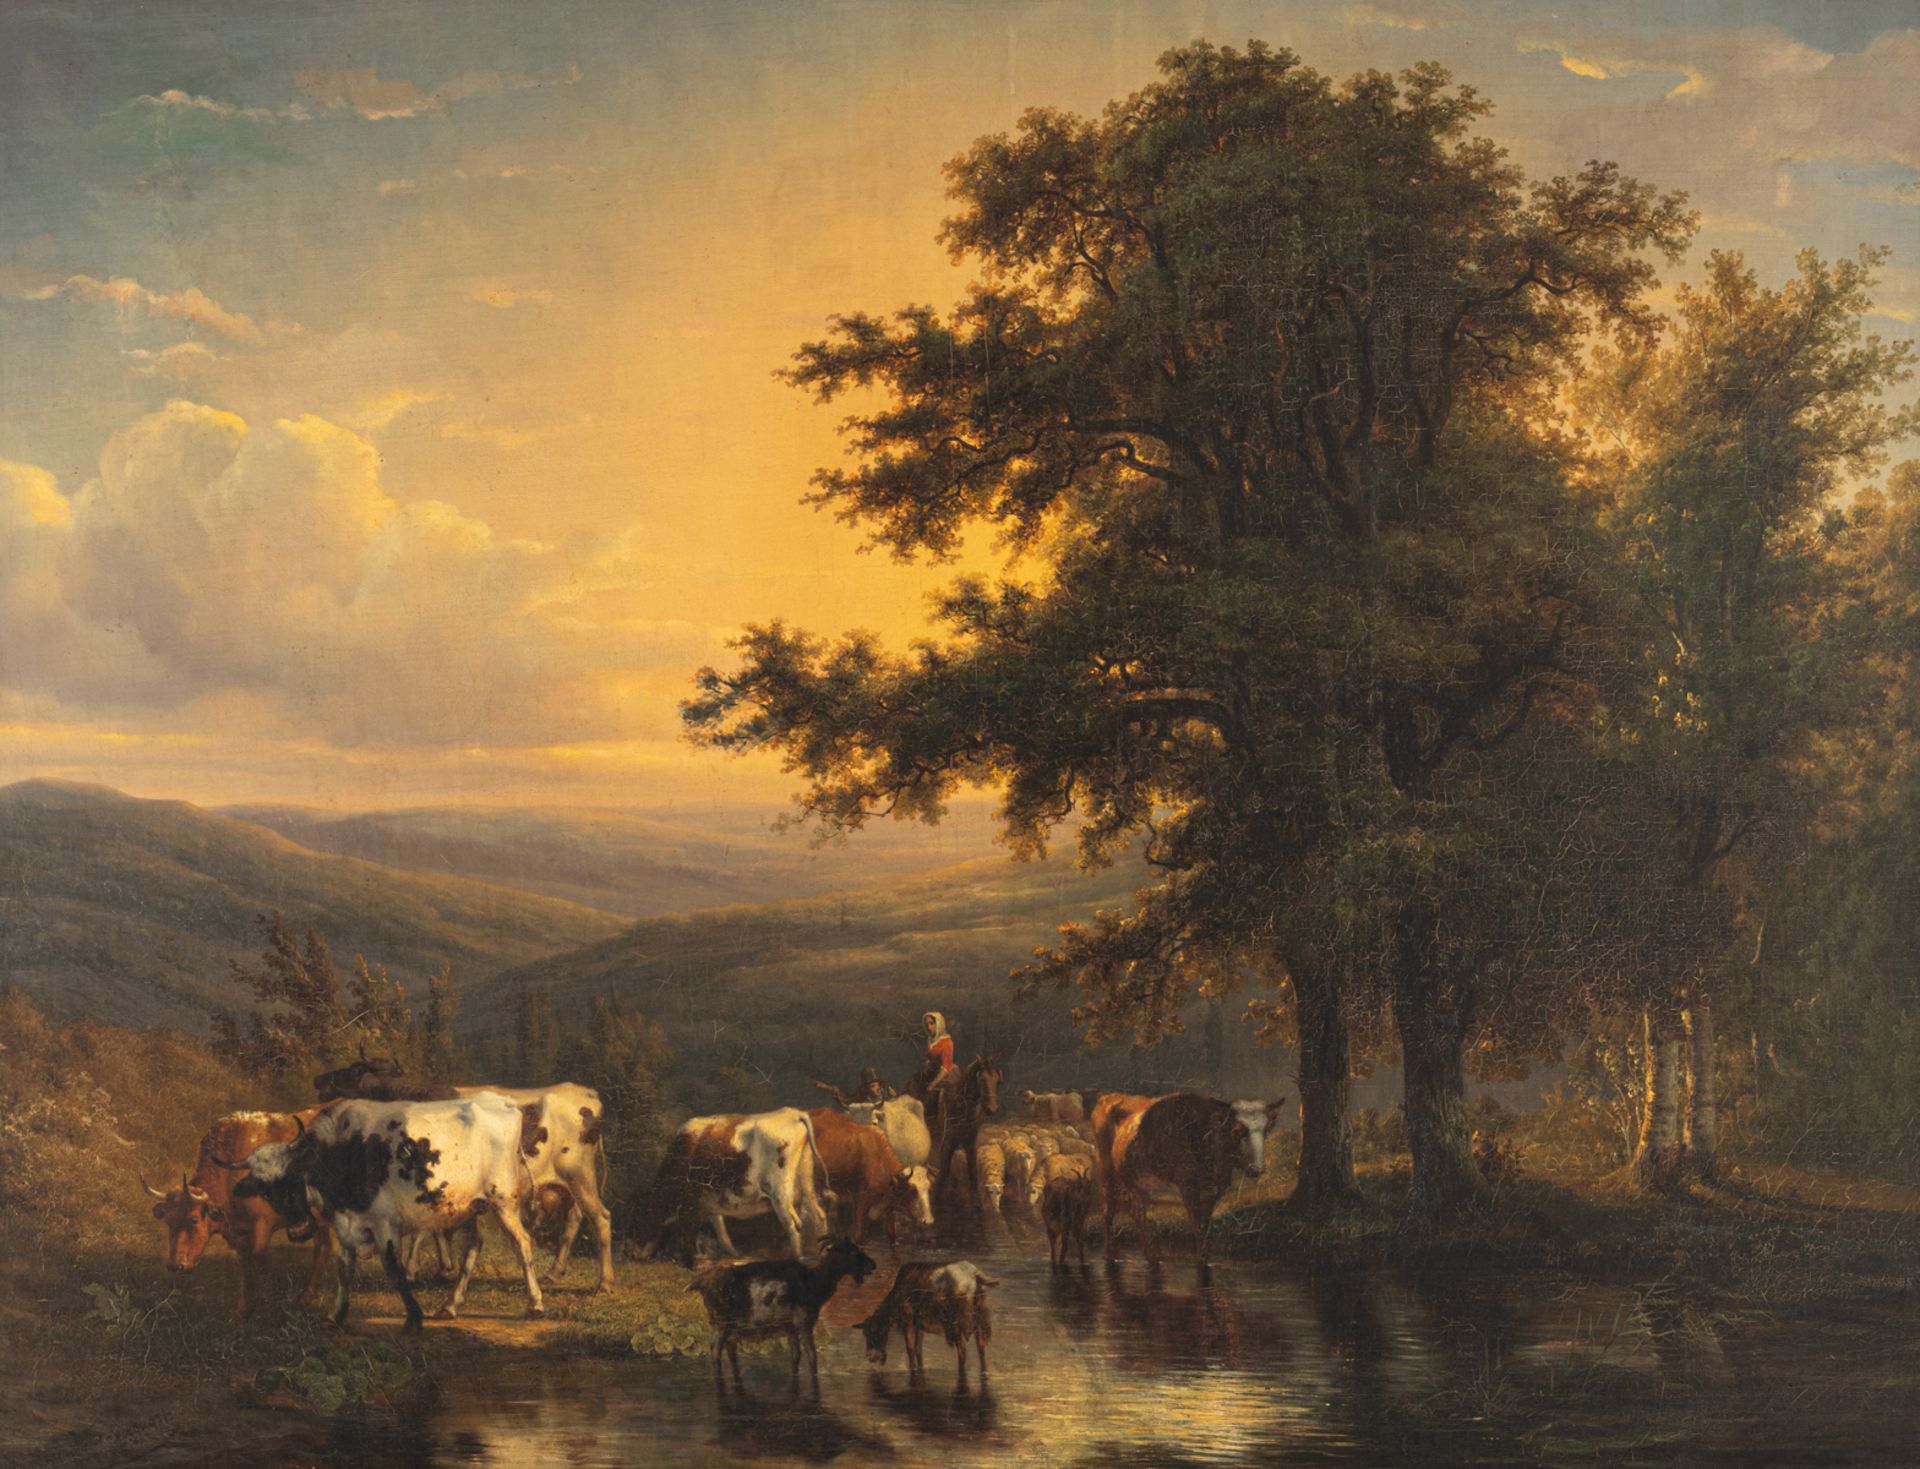 Stocquart I., shepherds and their cattle near the pond, with inscription 'Antwerpen' and dated 1849,